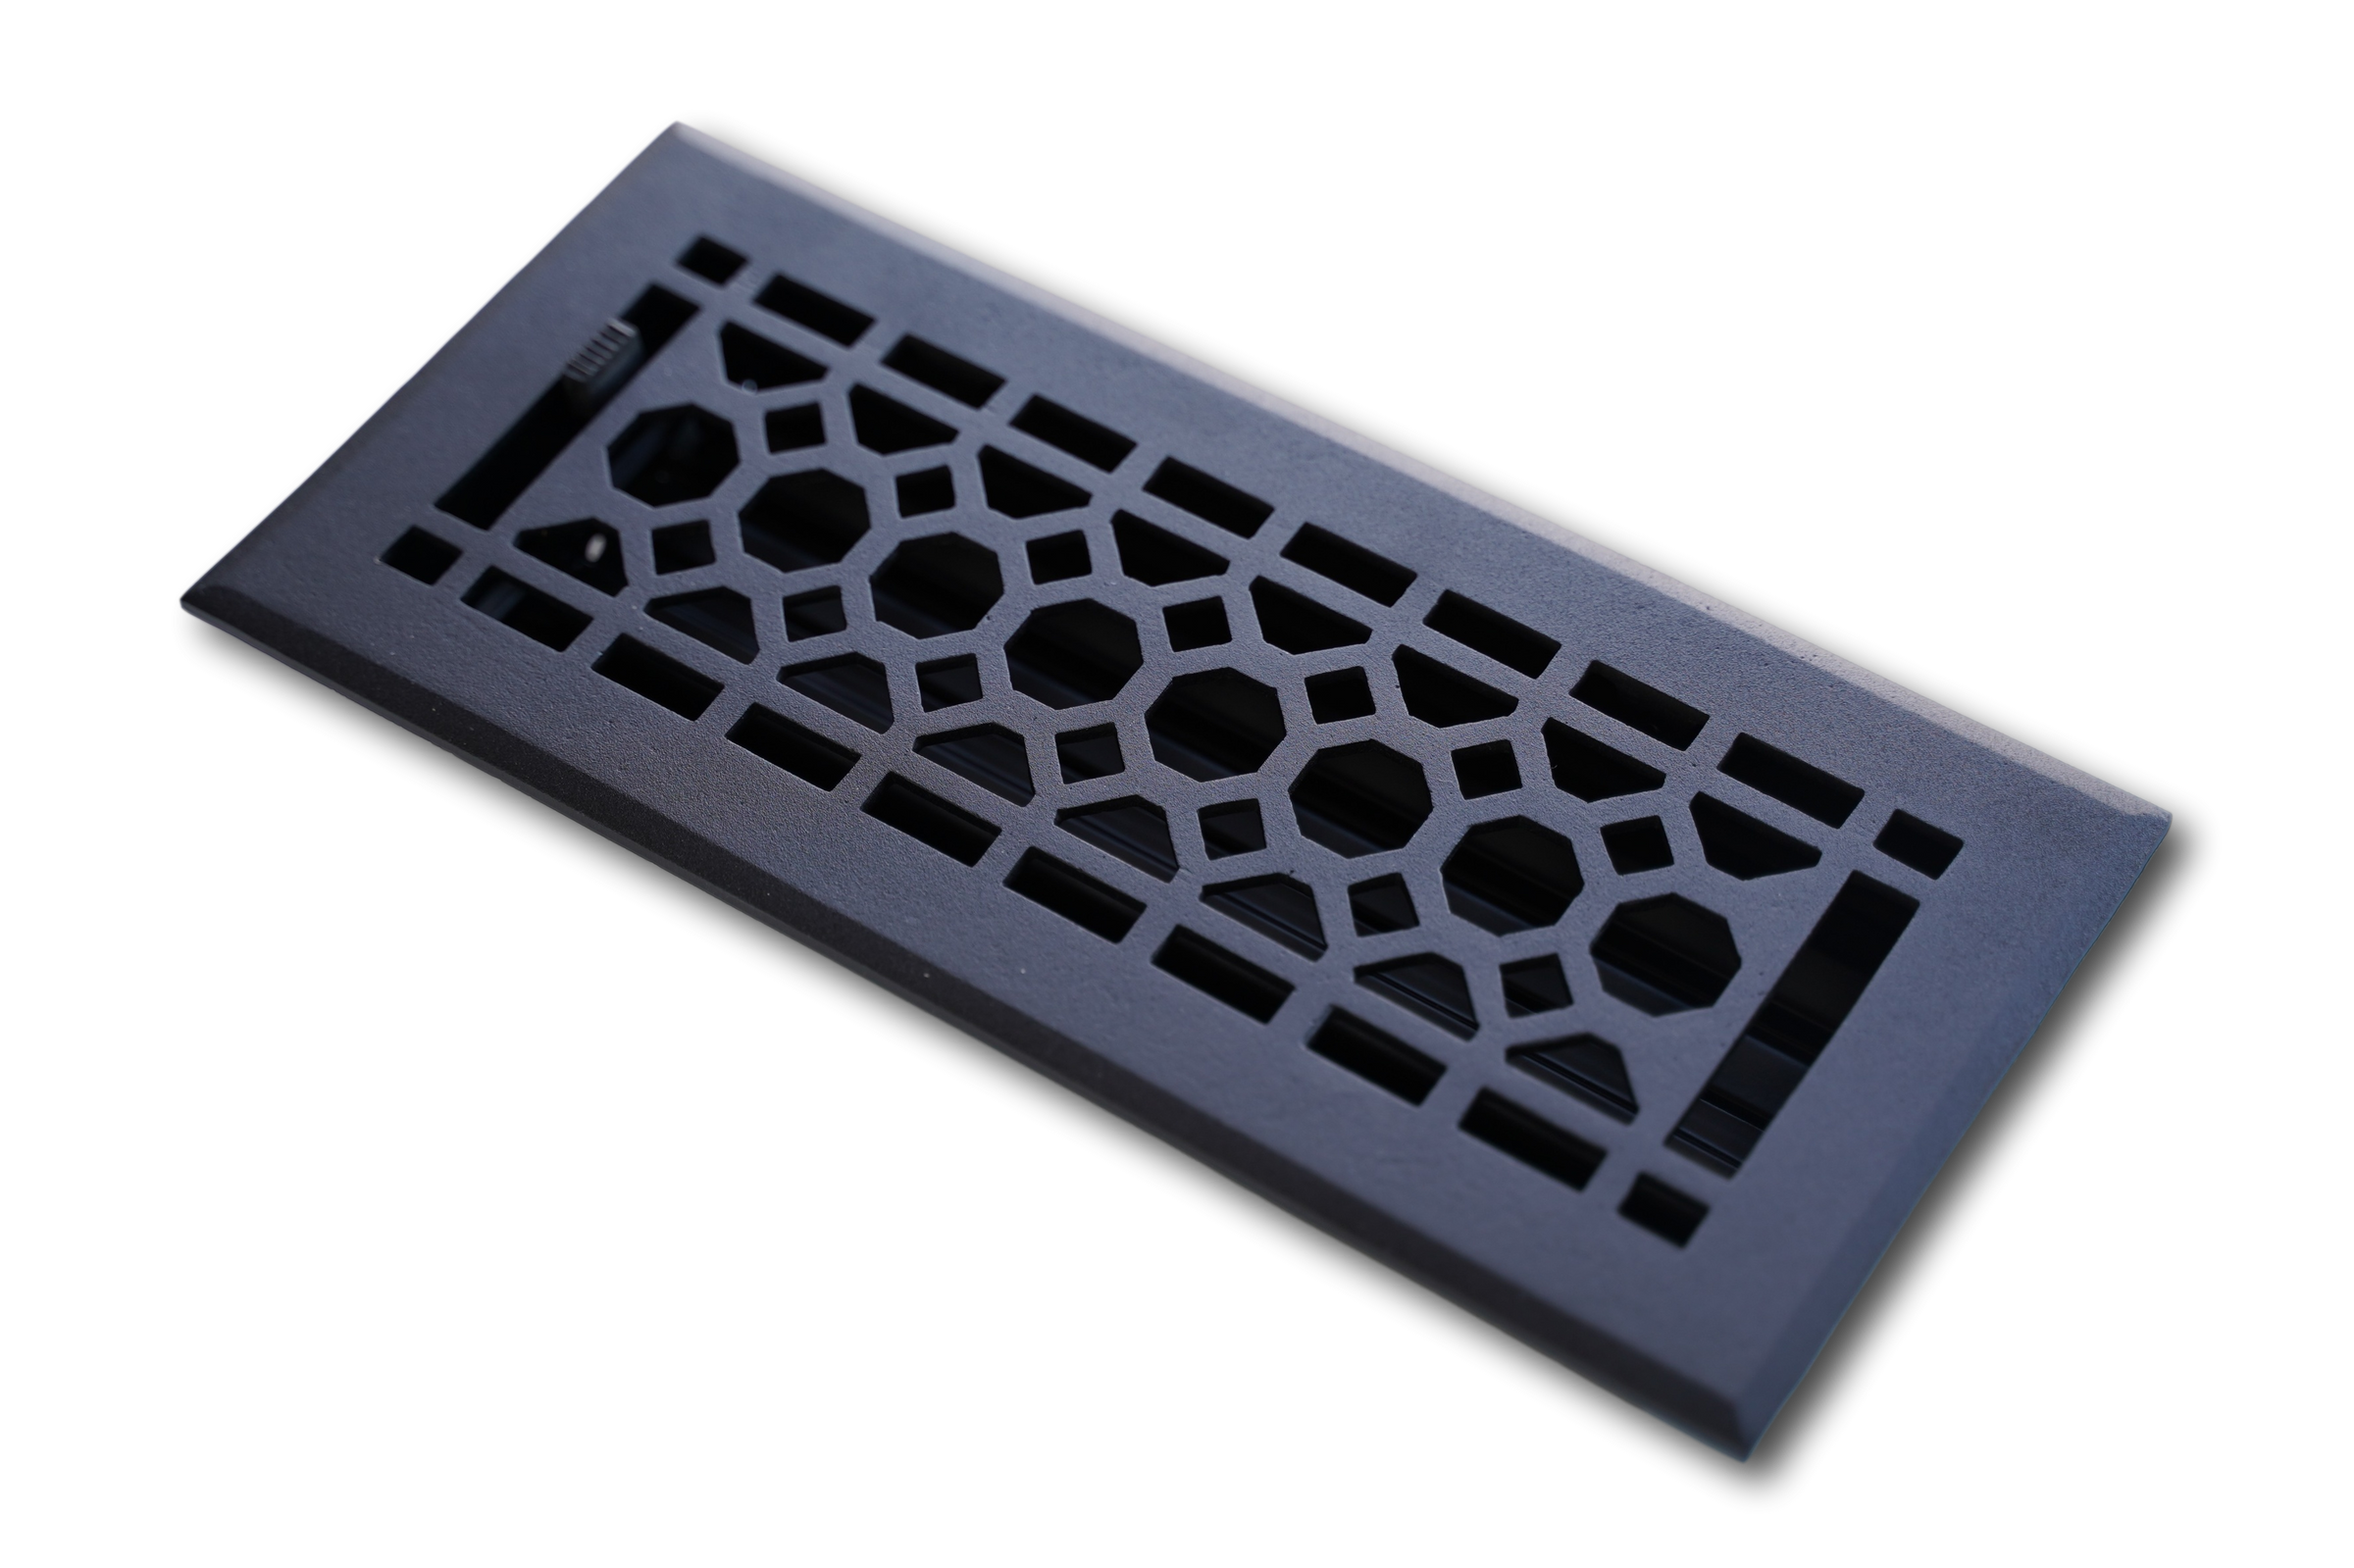 Cast Iron Vent Covers